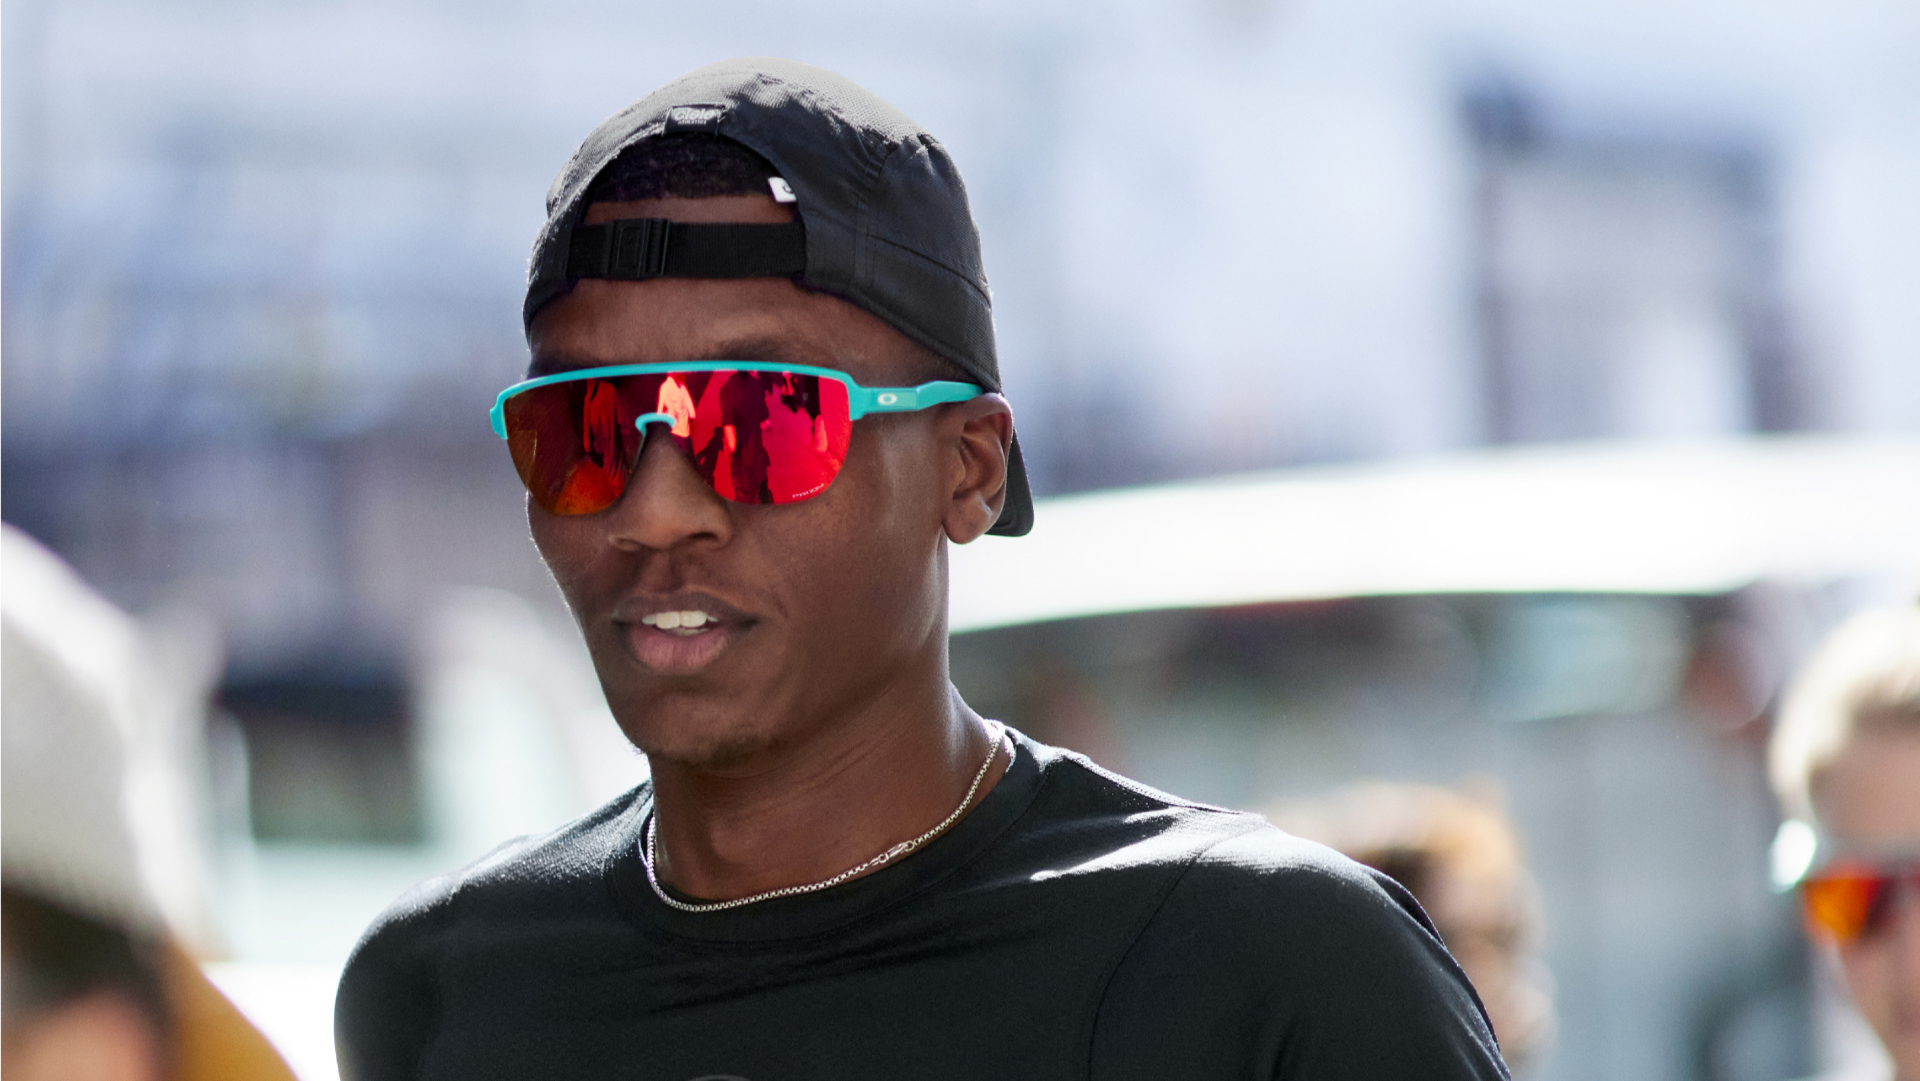 Can't stop thinking about Oakley's first dedicated running sunglasses